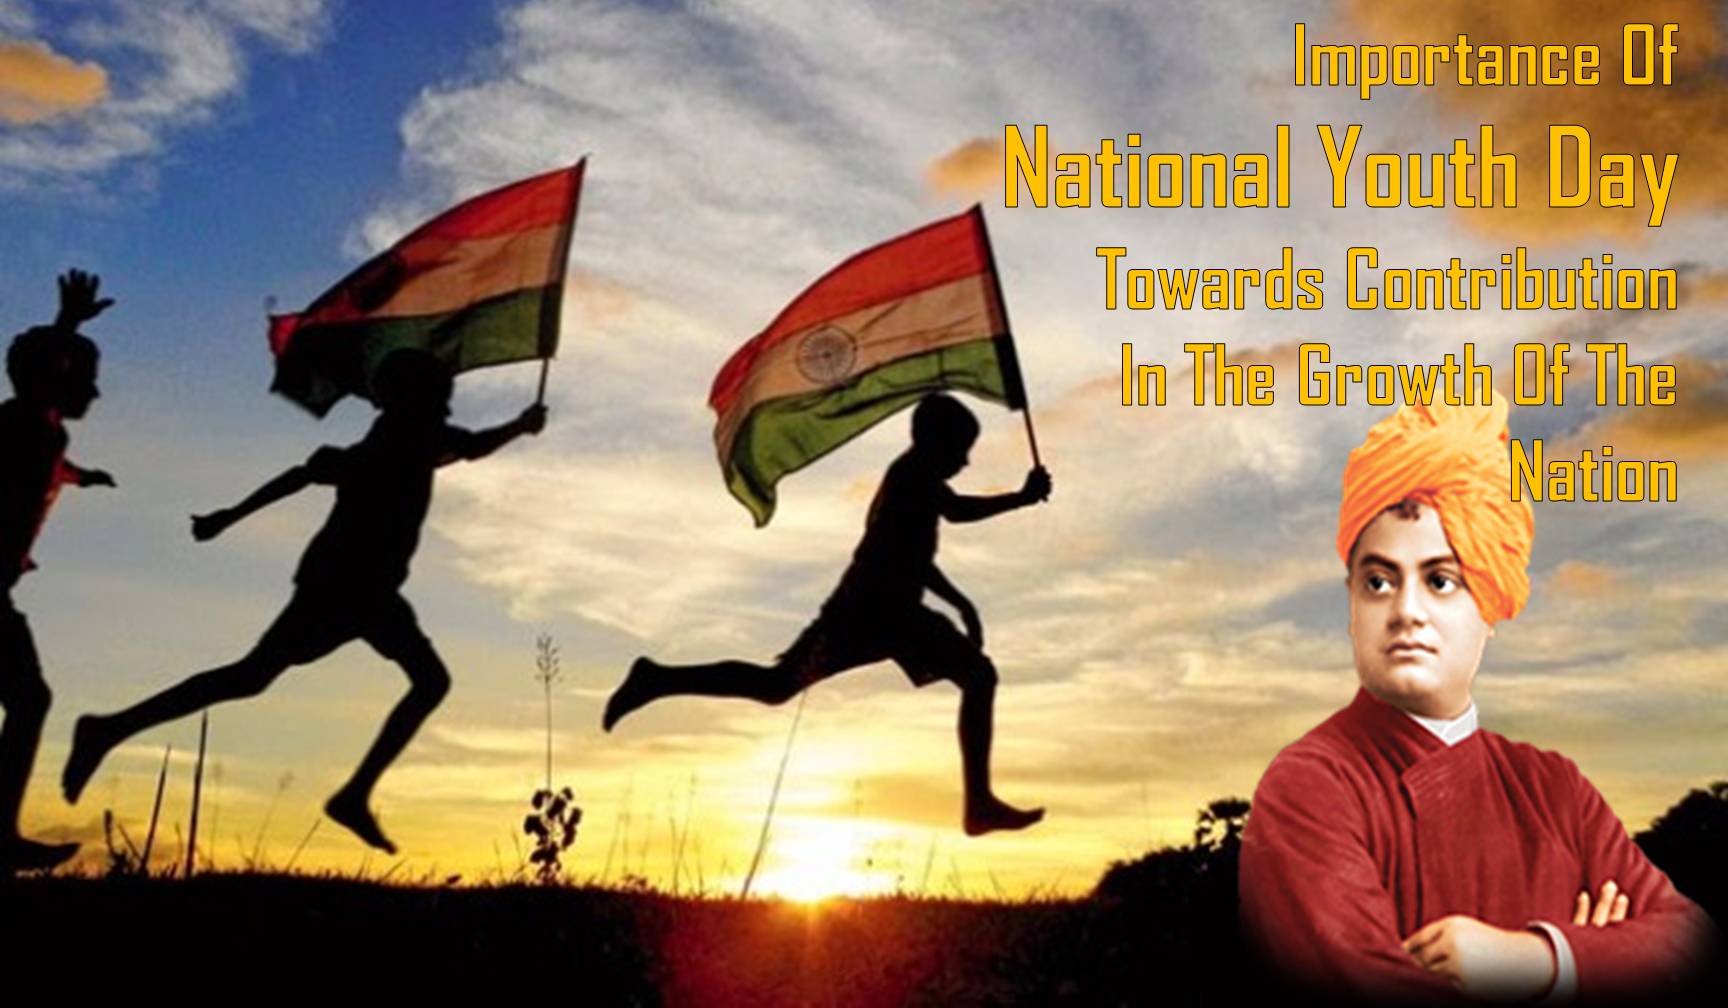 importance of national youth day towards contribution in the growth of the nation